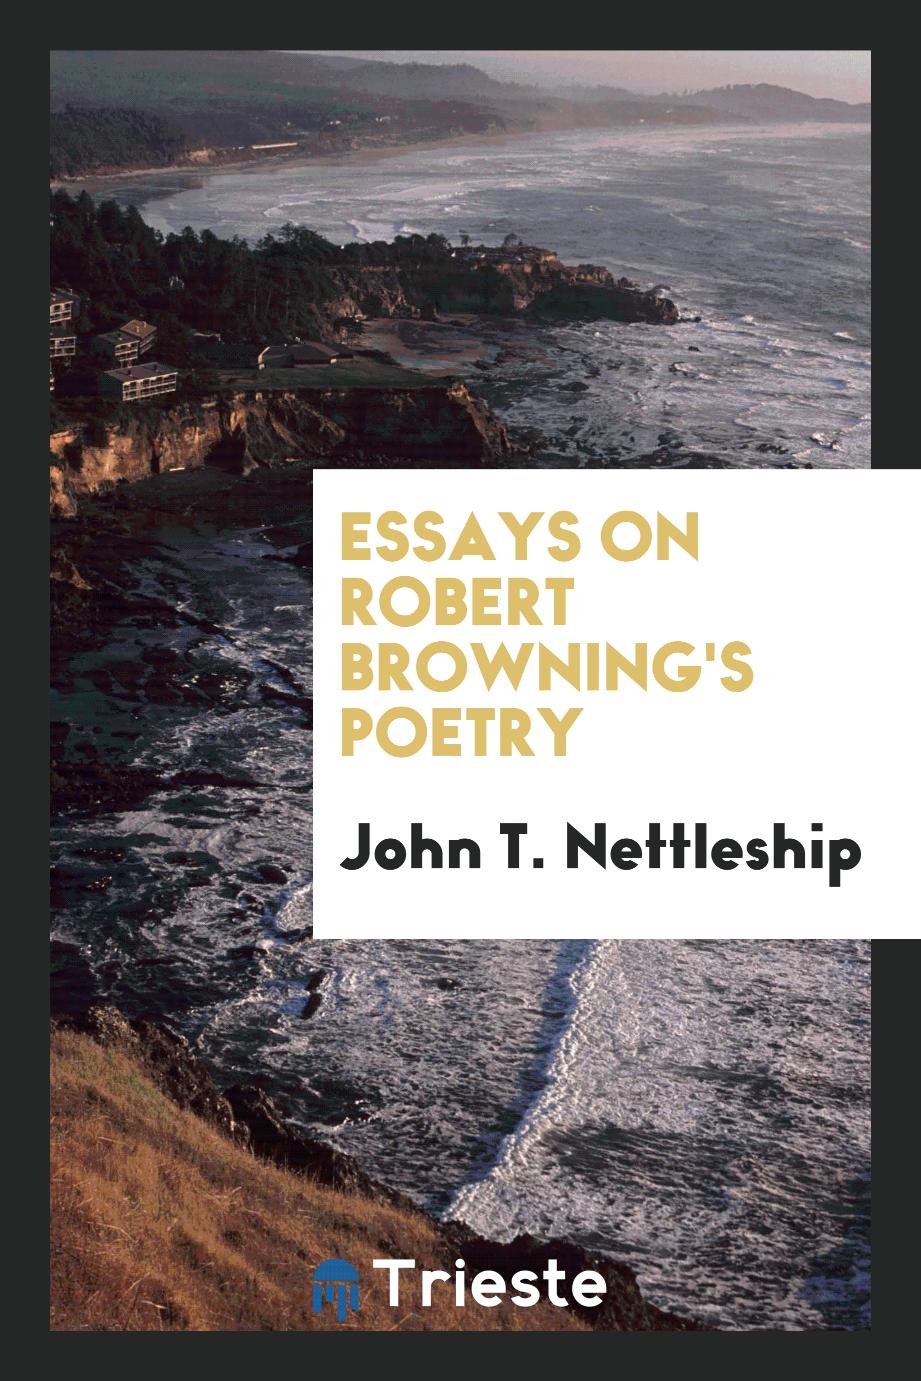 Essays on Robert Browning's poetry